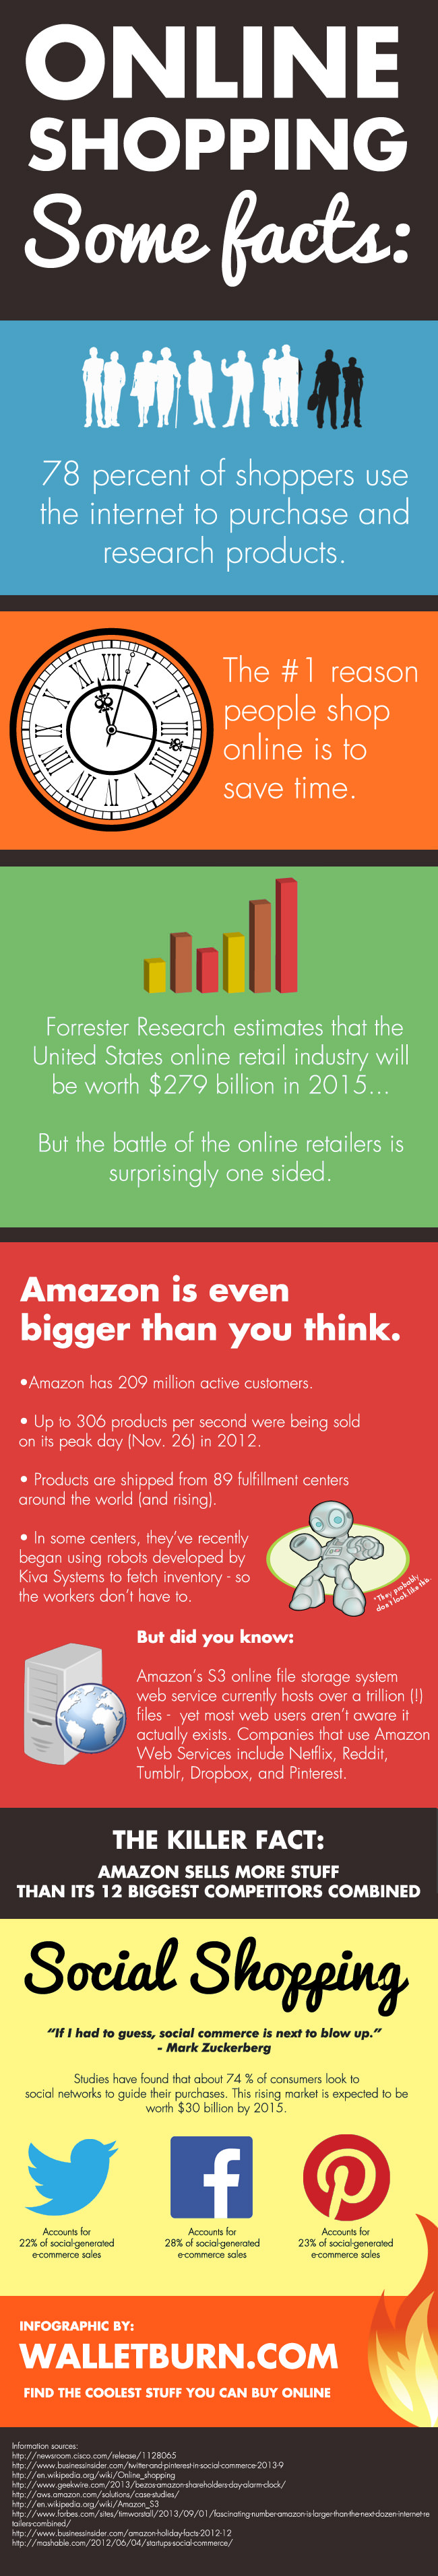 Some Facts about Online Shopping Visual.ly